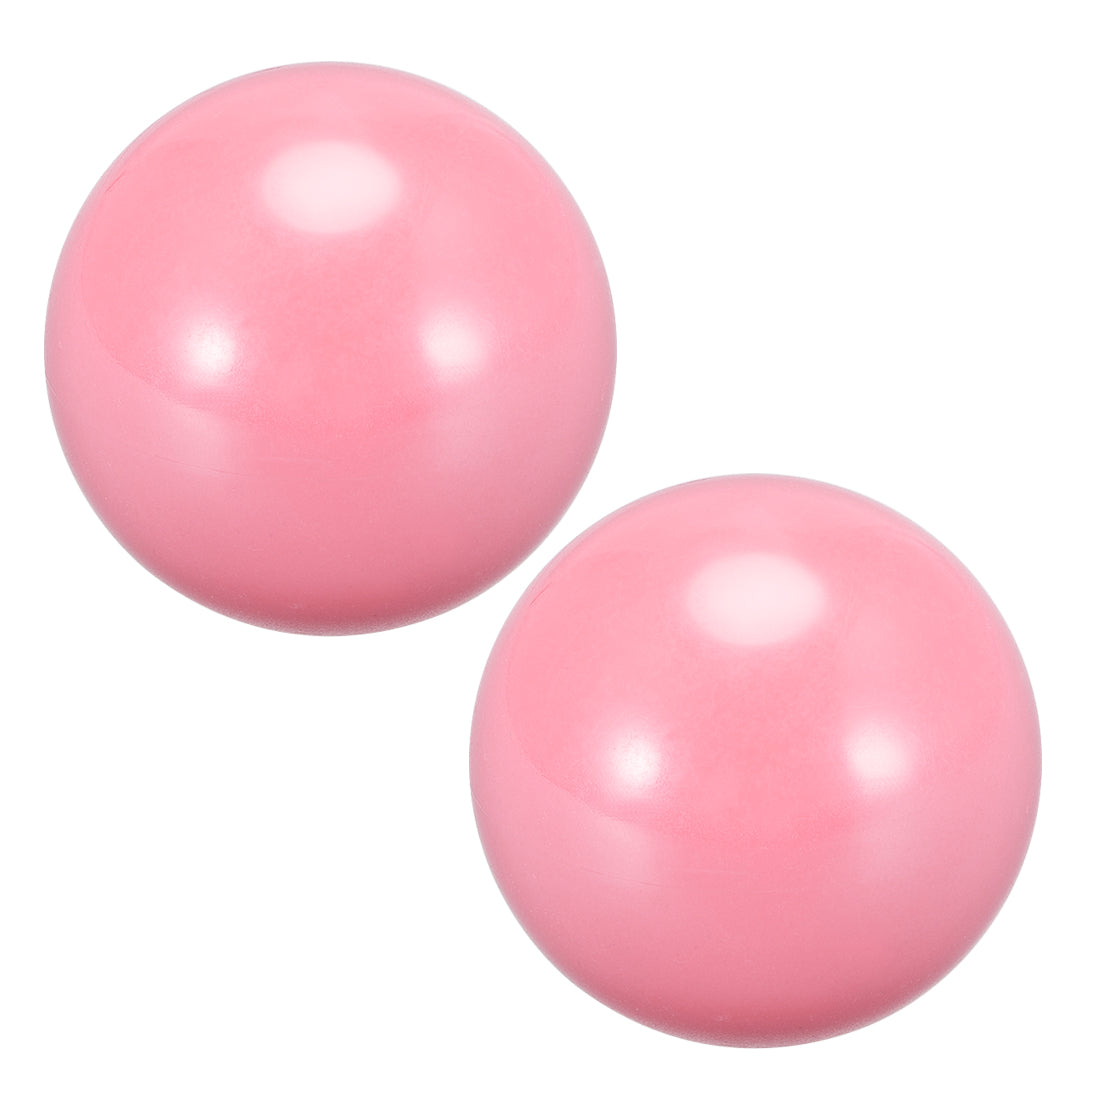 uxcell Uxcell Joystick Ball Top Handle Rocker Round Head Arcade Fighting Game DIY Parts Replacement Pink 2Pcs